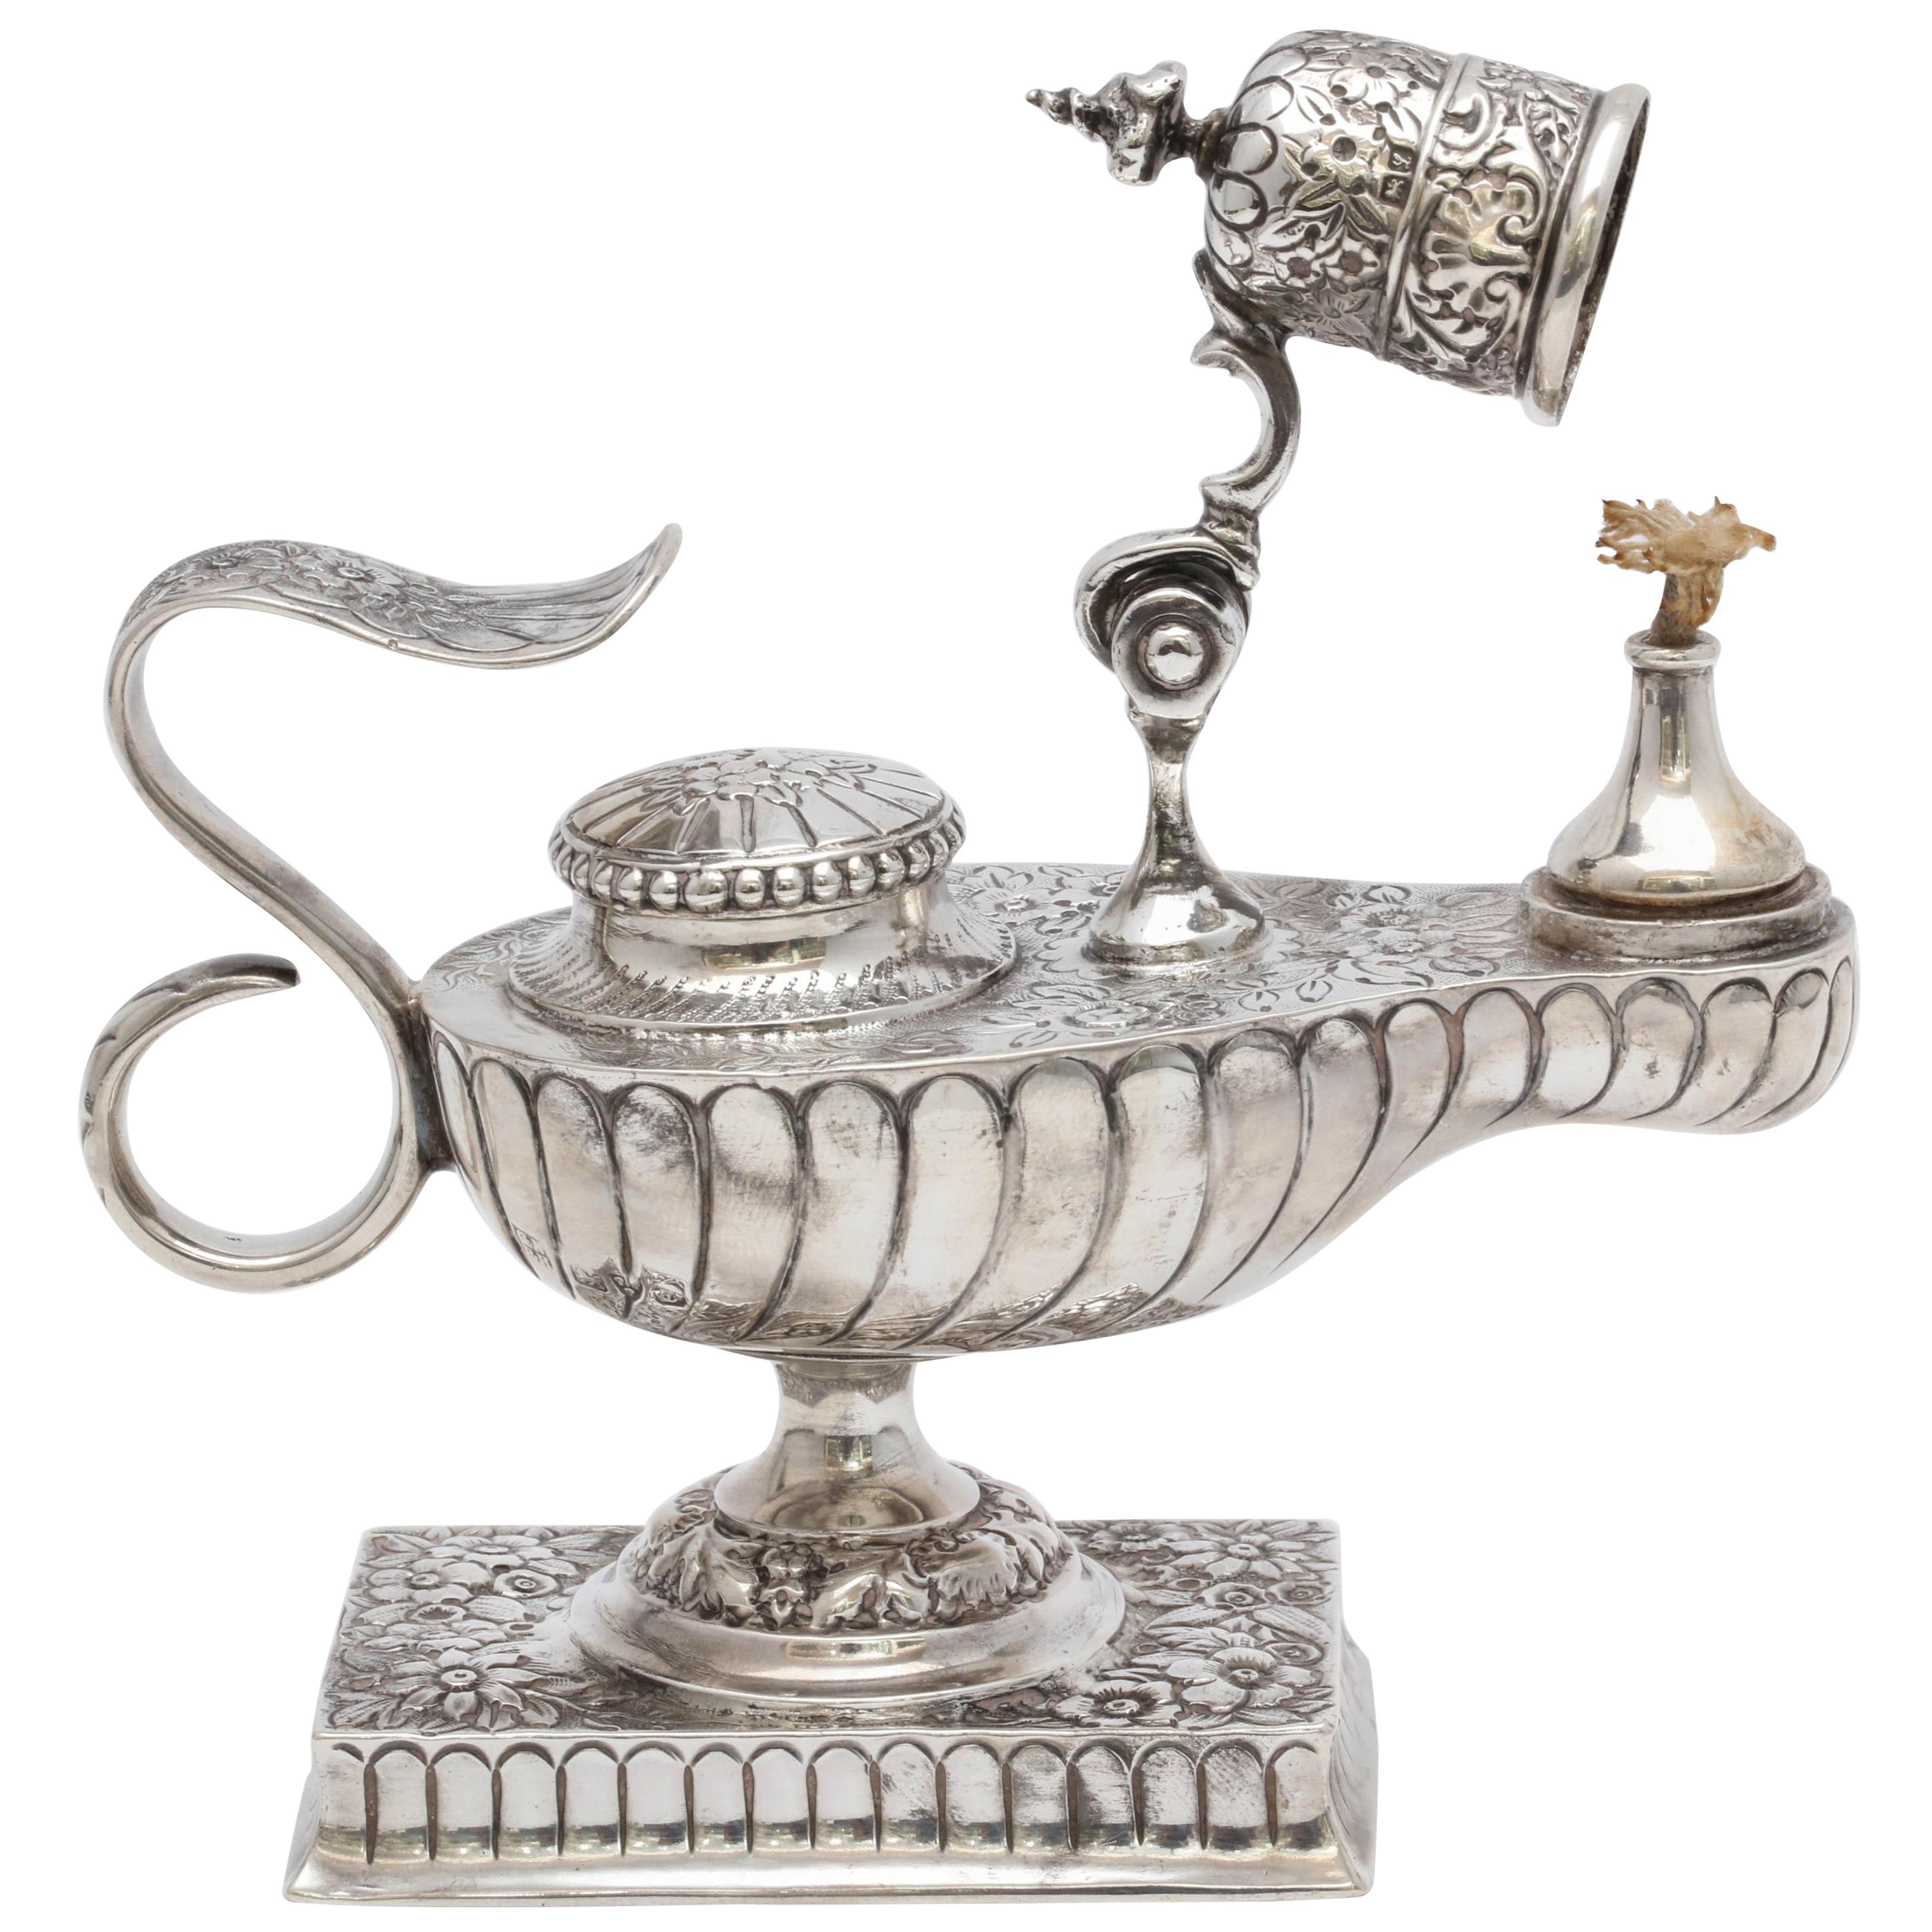 Rare, Unusual, Edwardian, Sterling Silver Aladdin's Lamp, Form Table Lighter